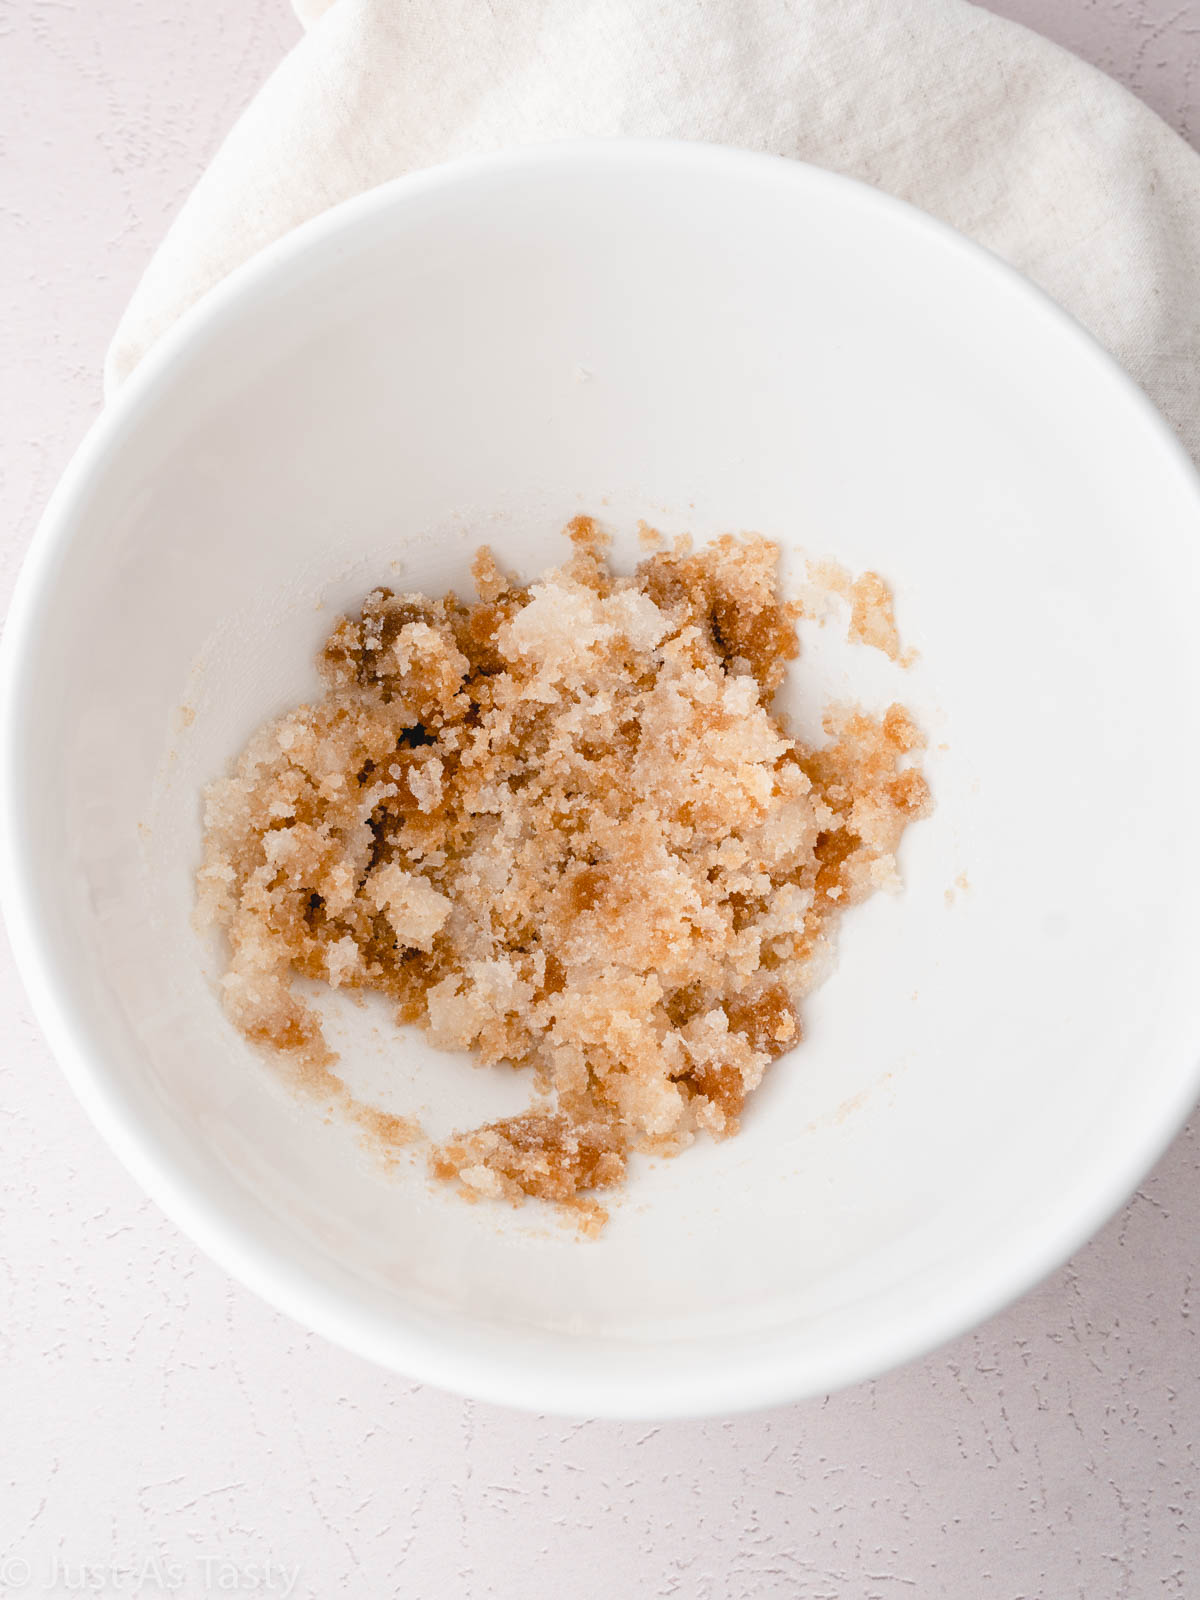 Sugar and oil in a bowl.